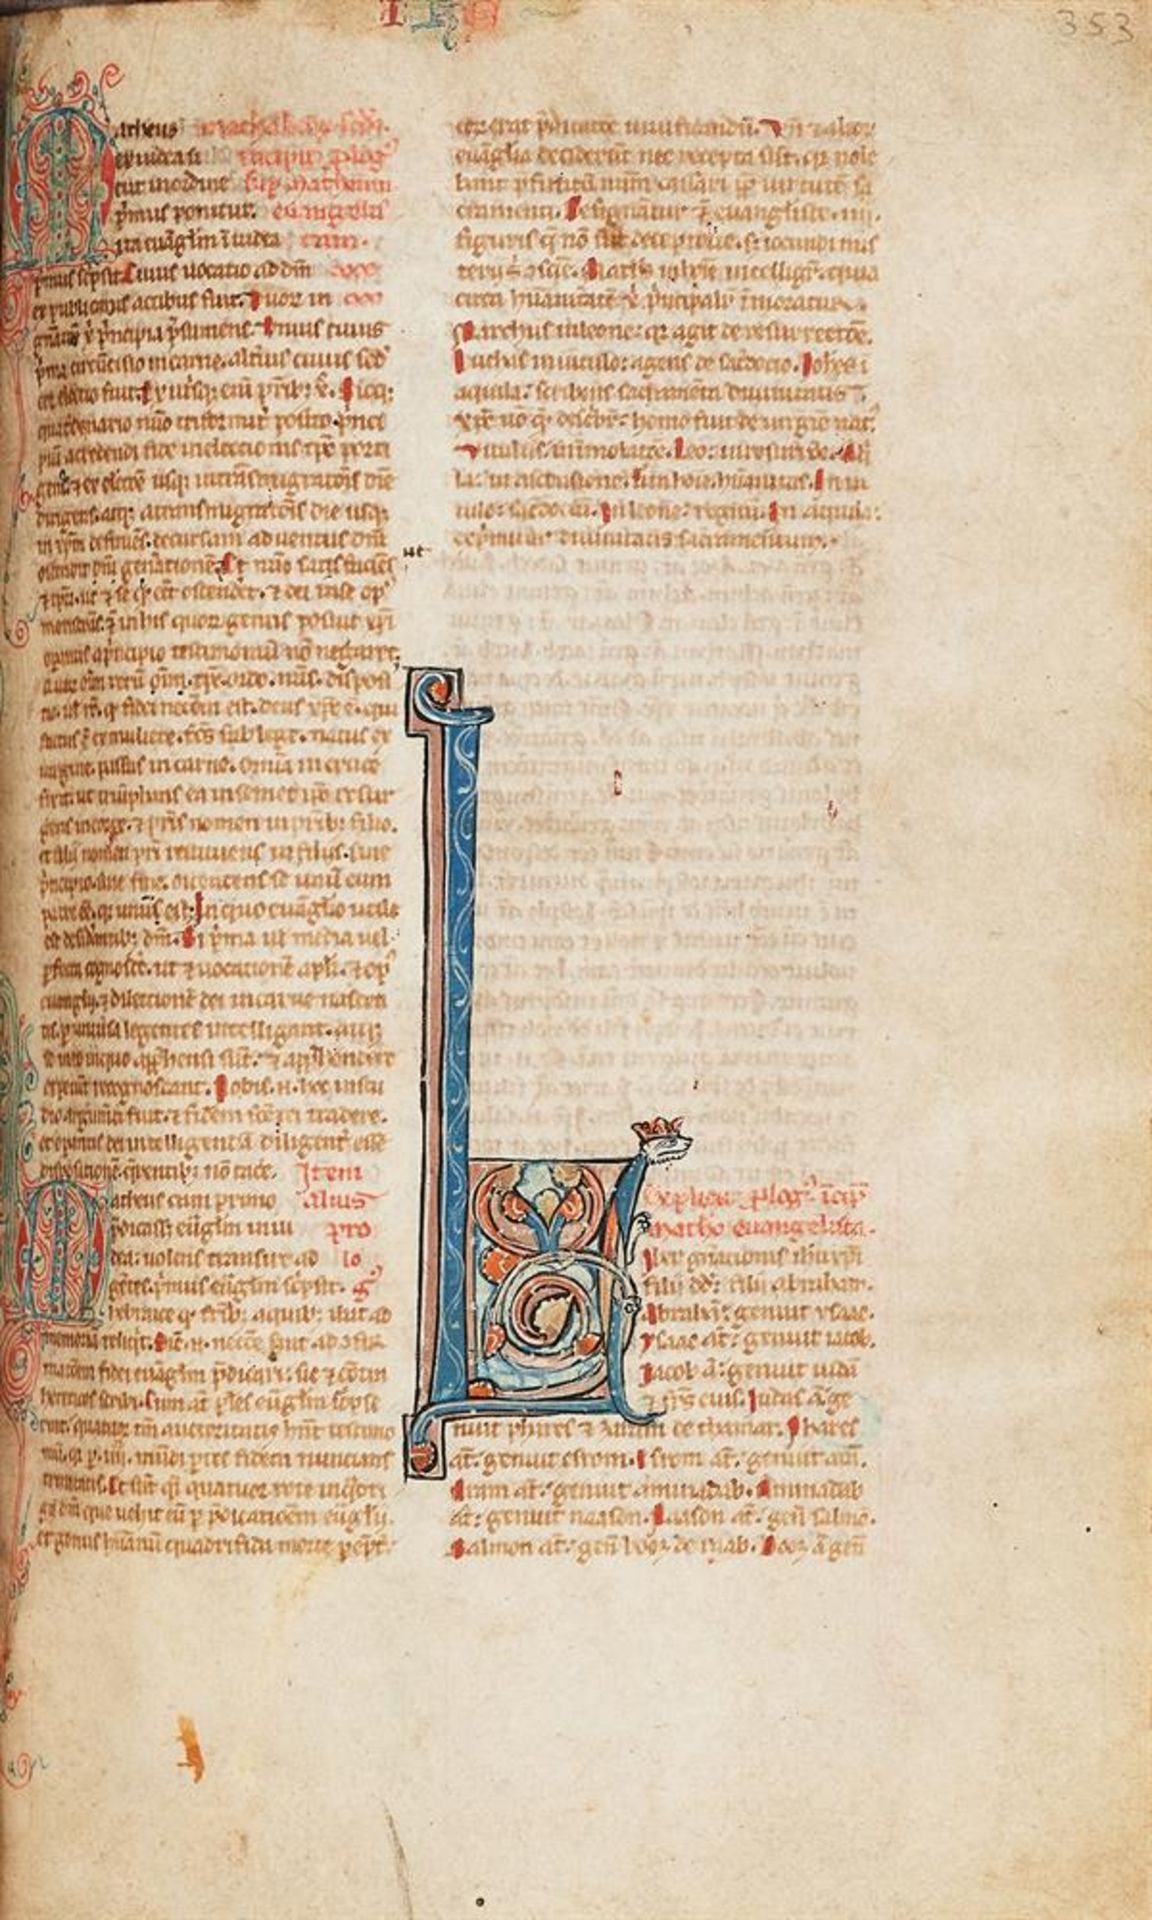 Ɵ The Bishop Carr Bible, in Latin, decorated manuscript on parchment - Image 10 of 10